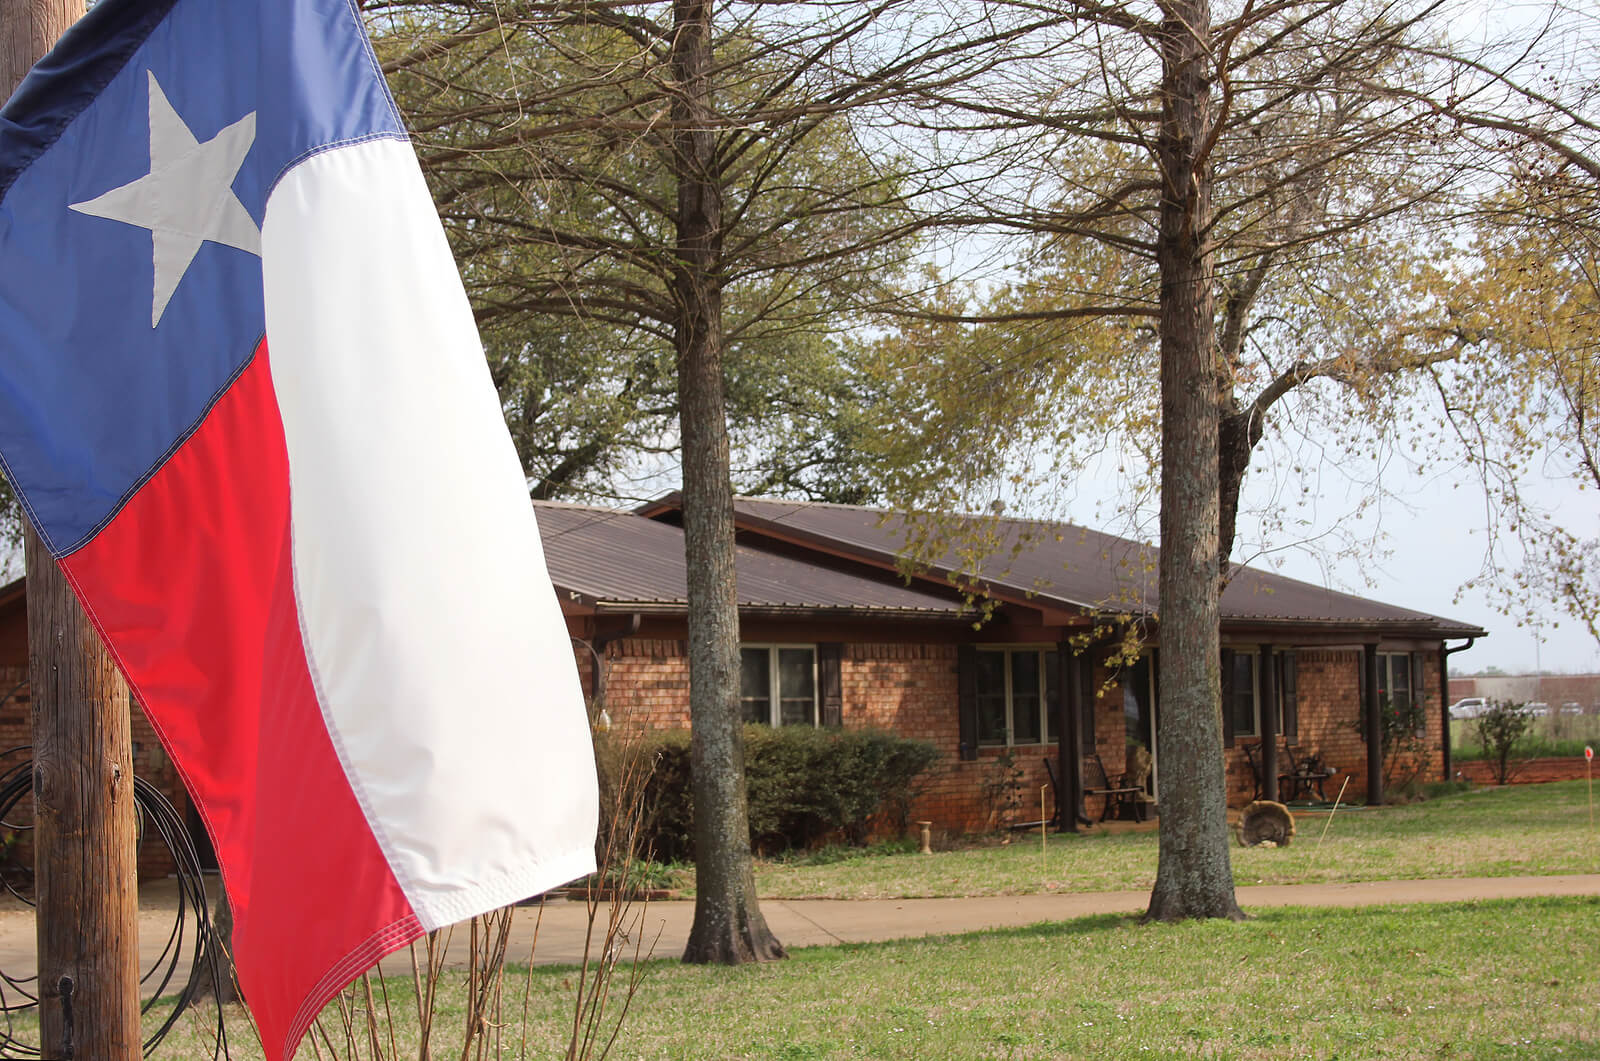 Texas flag with a single story brick home in the background